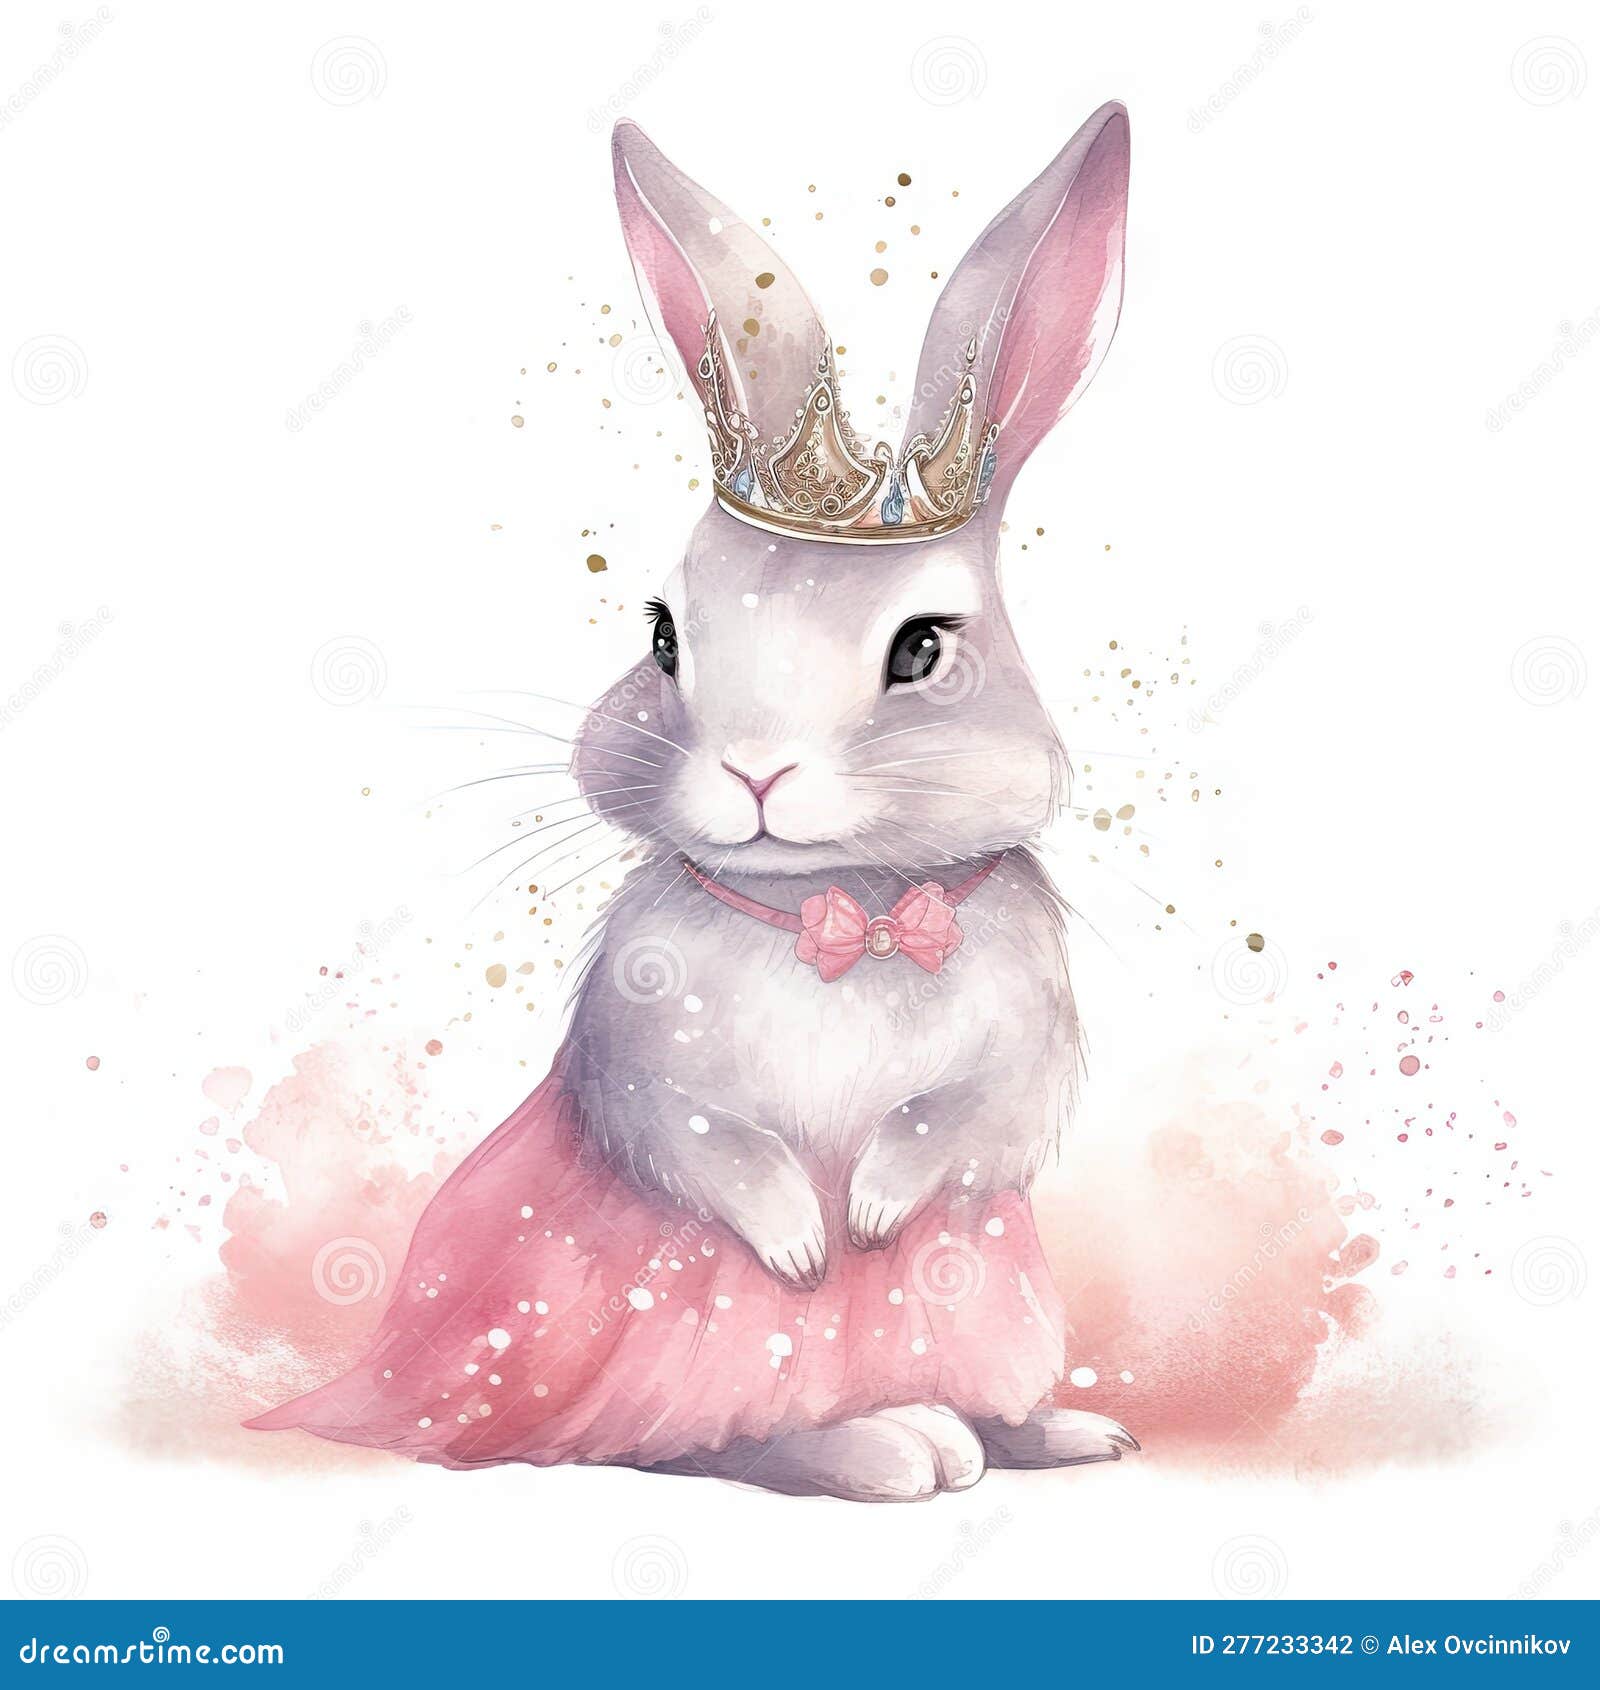 Sparkly Pink Rabbit Princess Illustration on White Background for Children  S Invitations and Scrapbooking. Stock Illustration - Illustration of  scrapbooking, adorable: 277233342